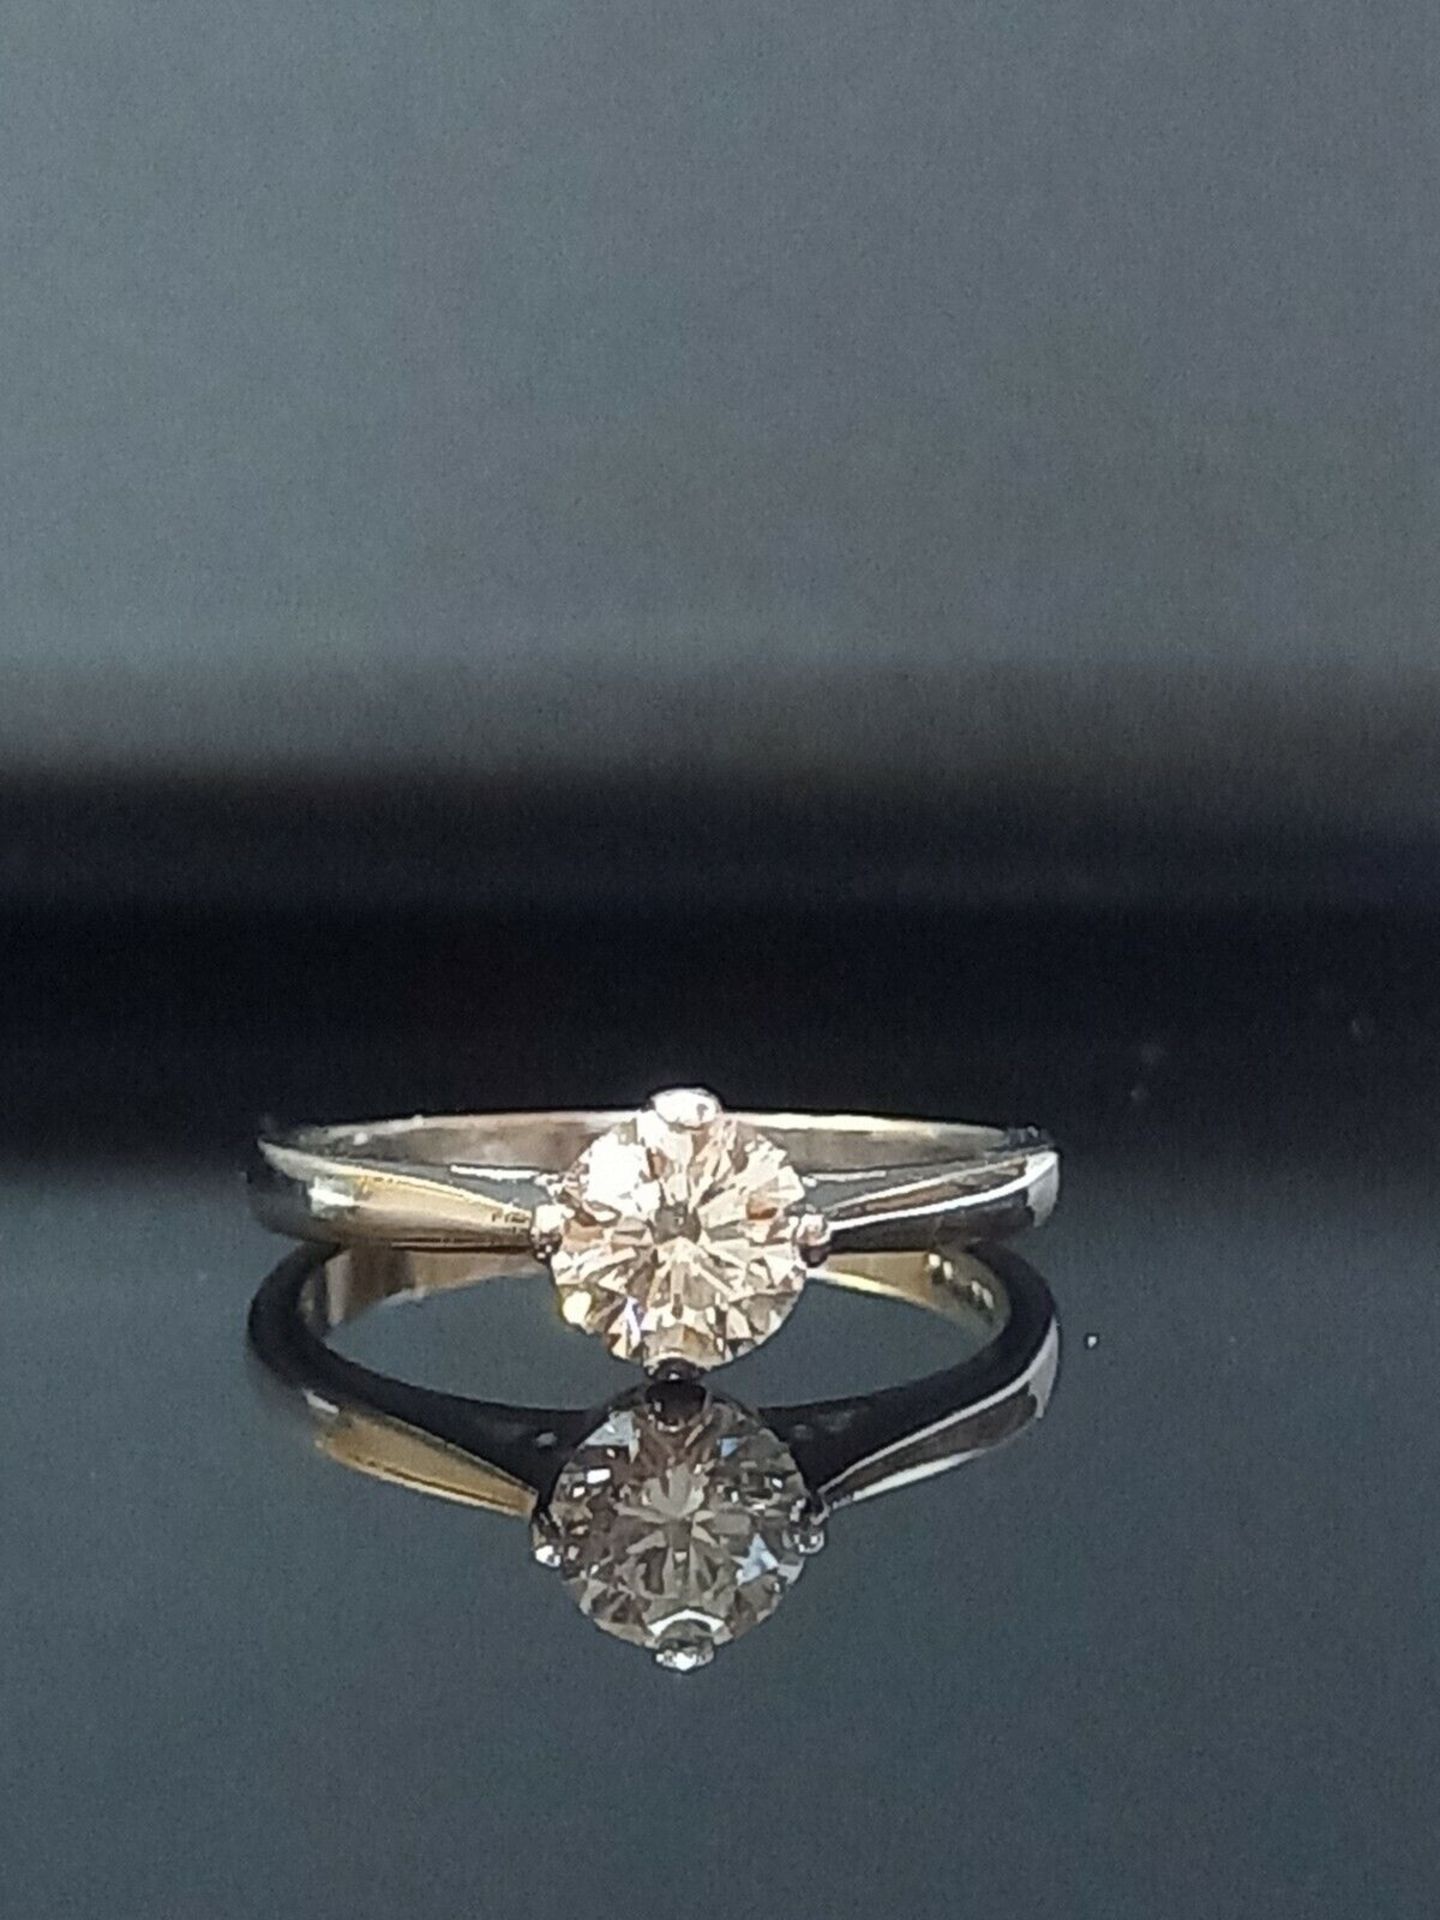 0.72 DIAMOND PLATINUM SOLITAIRE ENGAGEMENT RING/WHITE GOLD + GIFT BOX + VALUATION CERT OF £3795 - Image 3 of 8